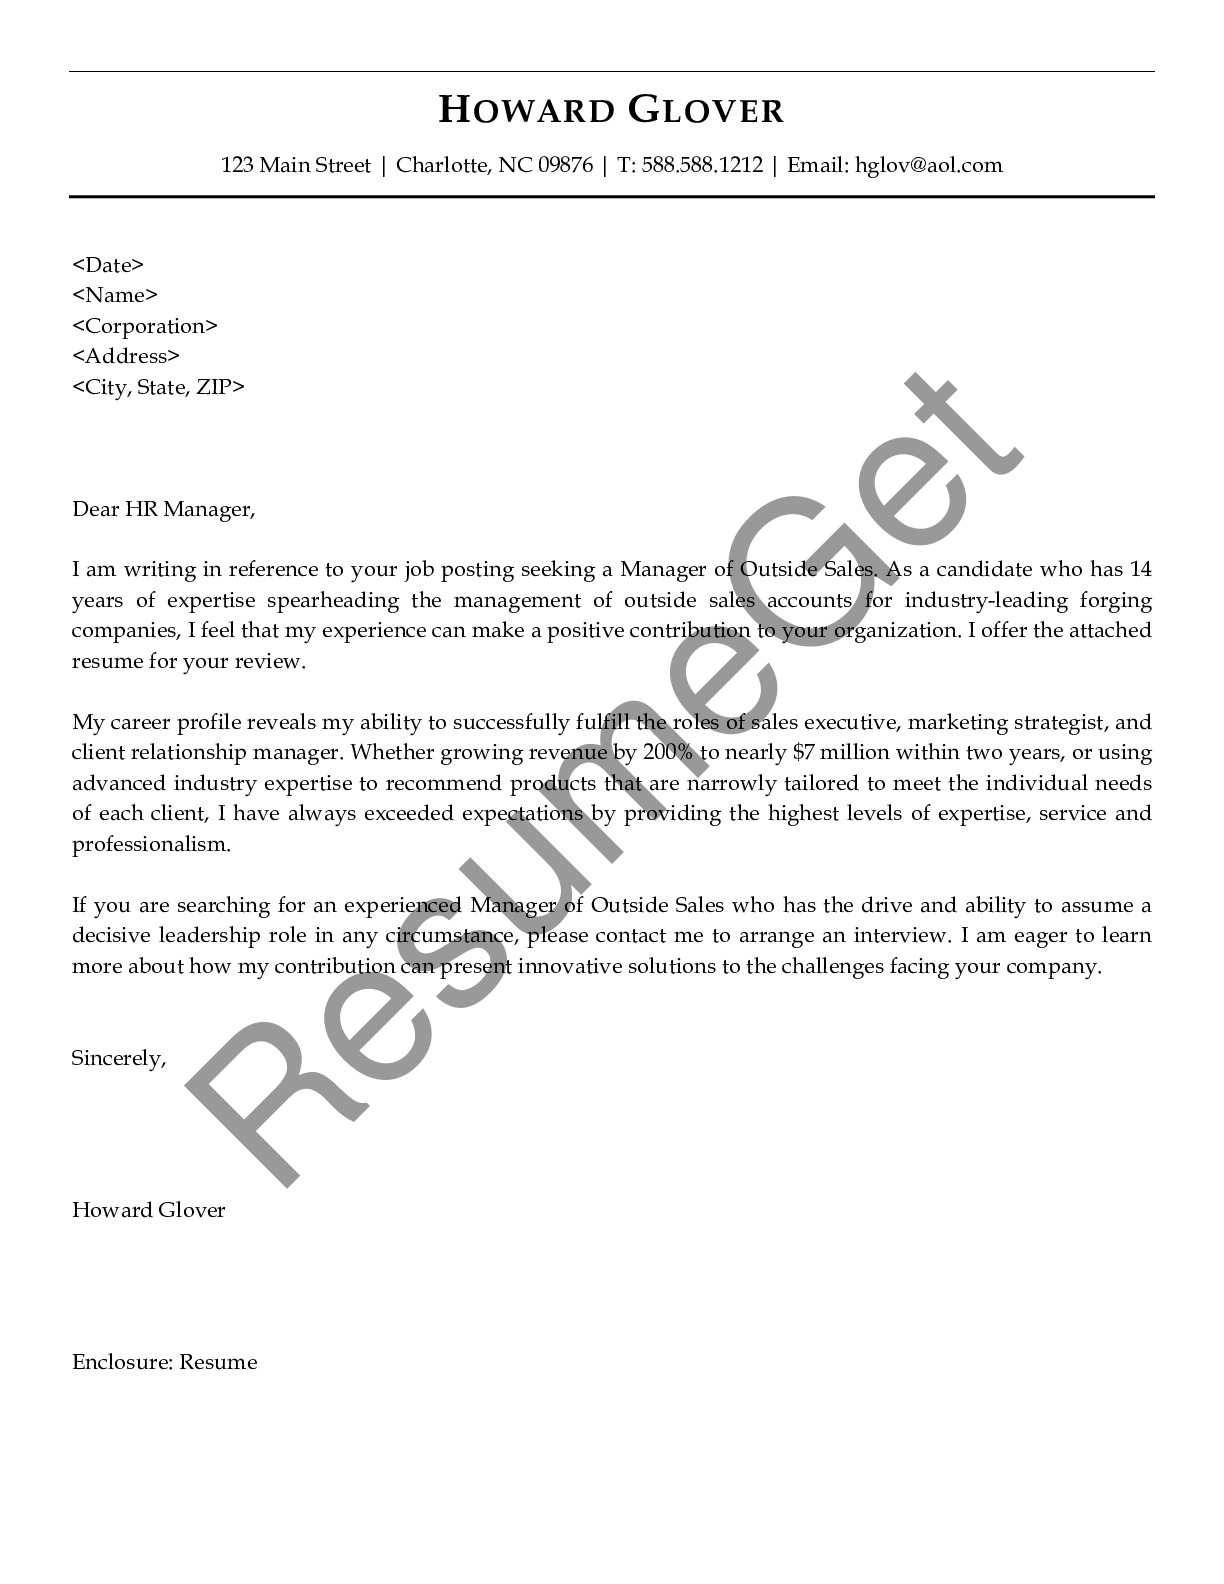 Cover Letter for Sales Manager